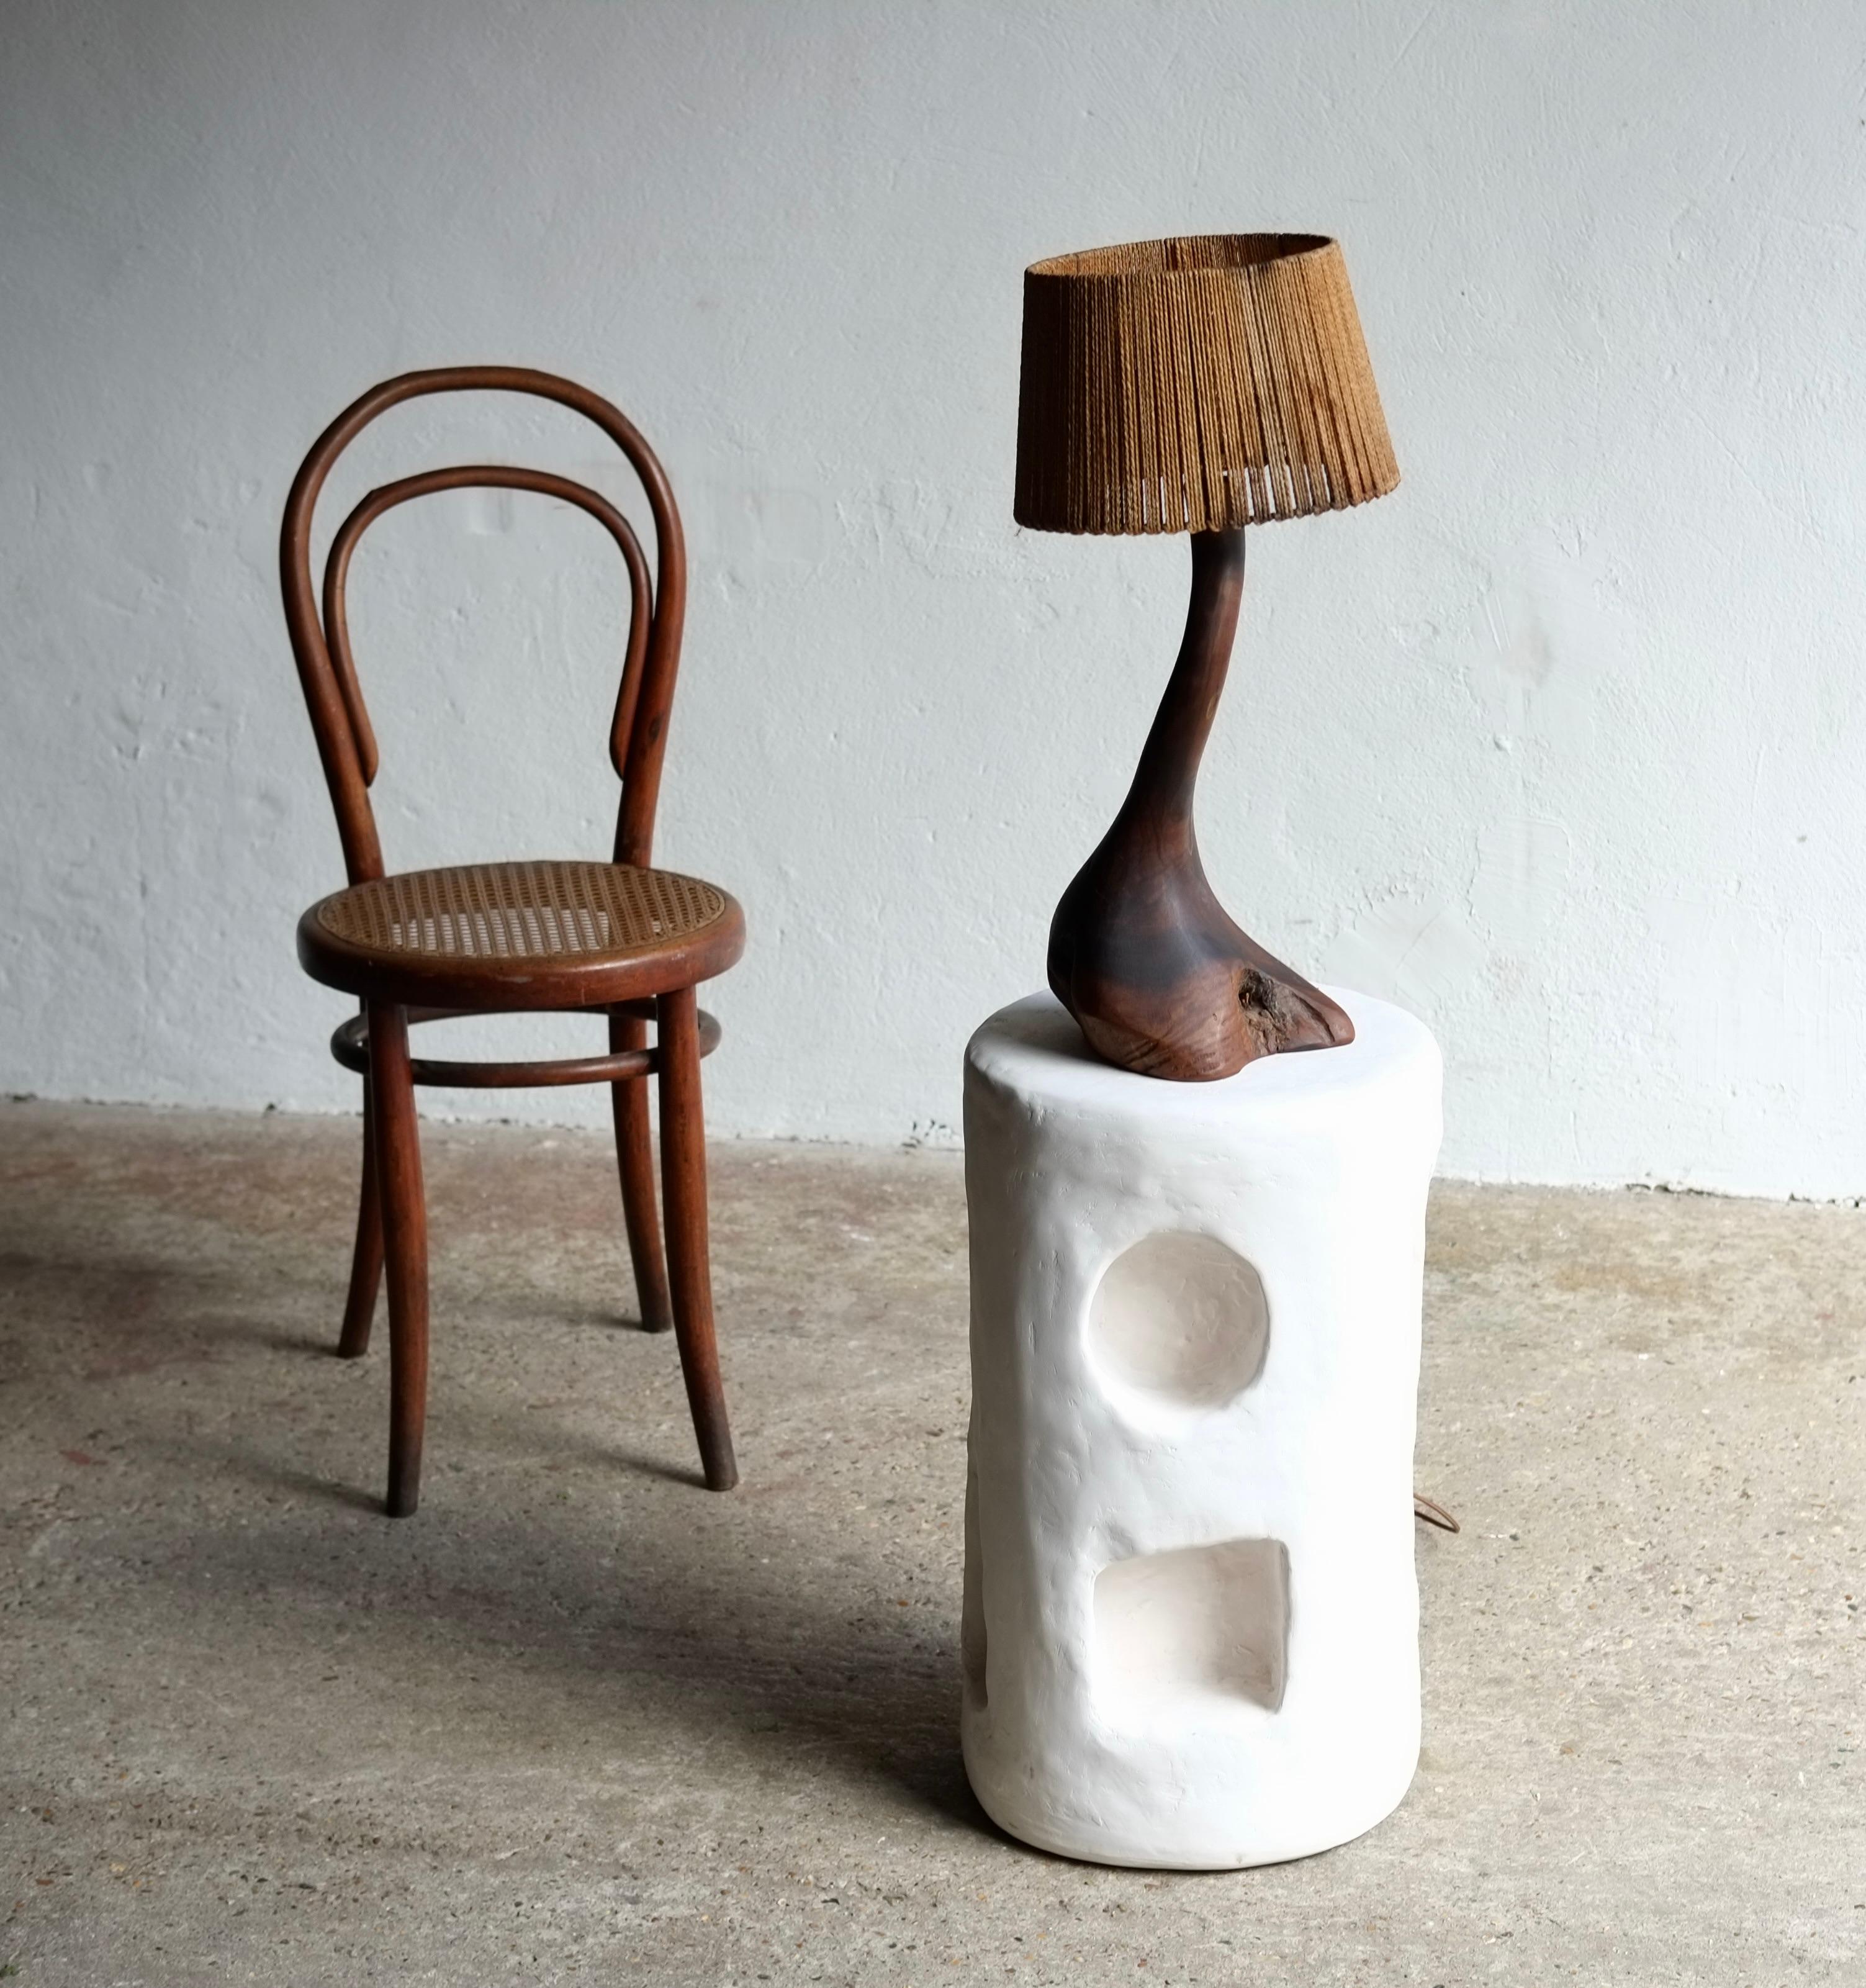 A midcentury French natural wood table lamp with a period rope lamp shade.

Dimensions including shade H 55 W 22 D 22 cm